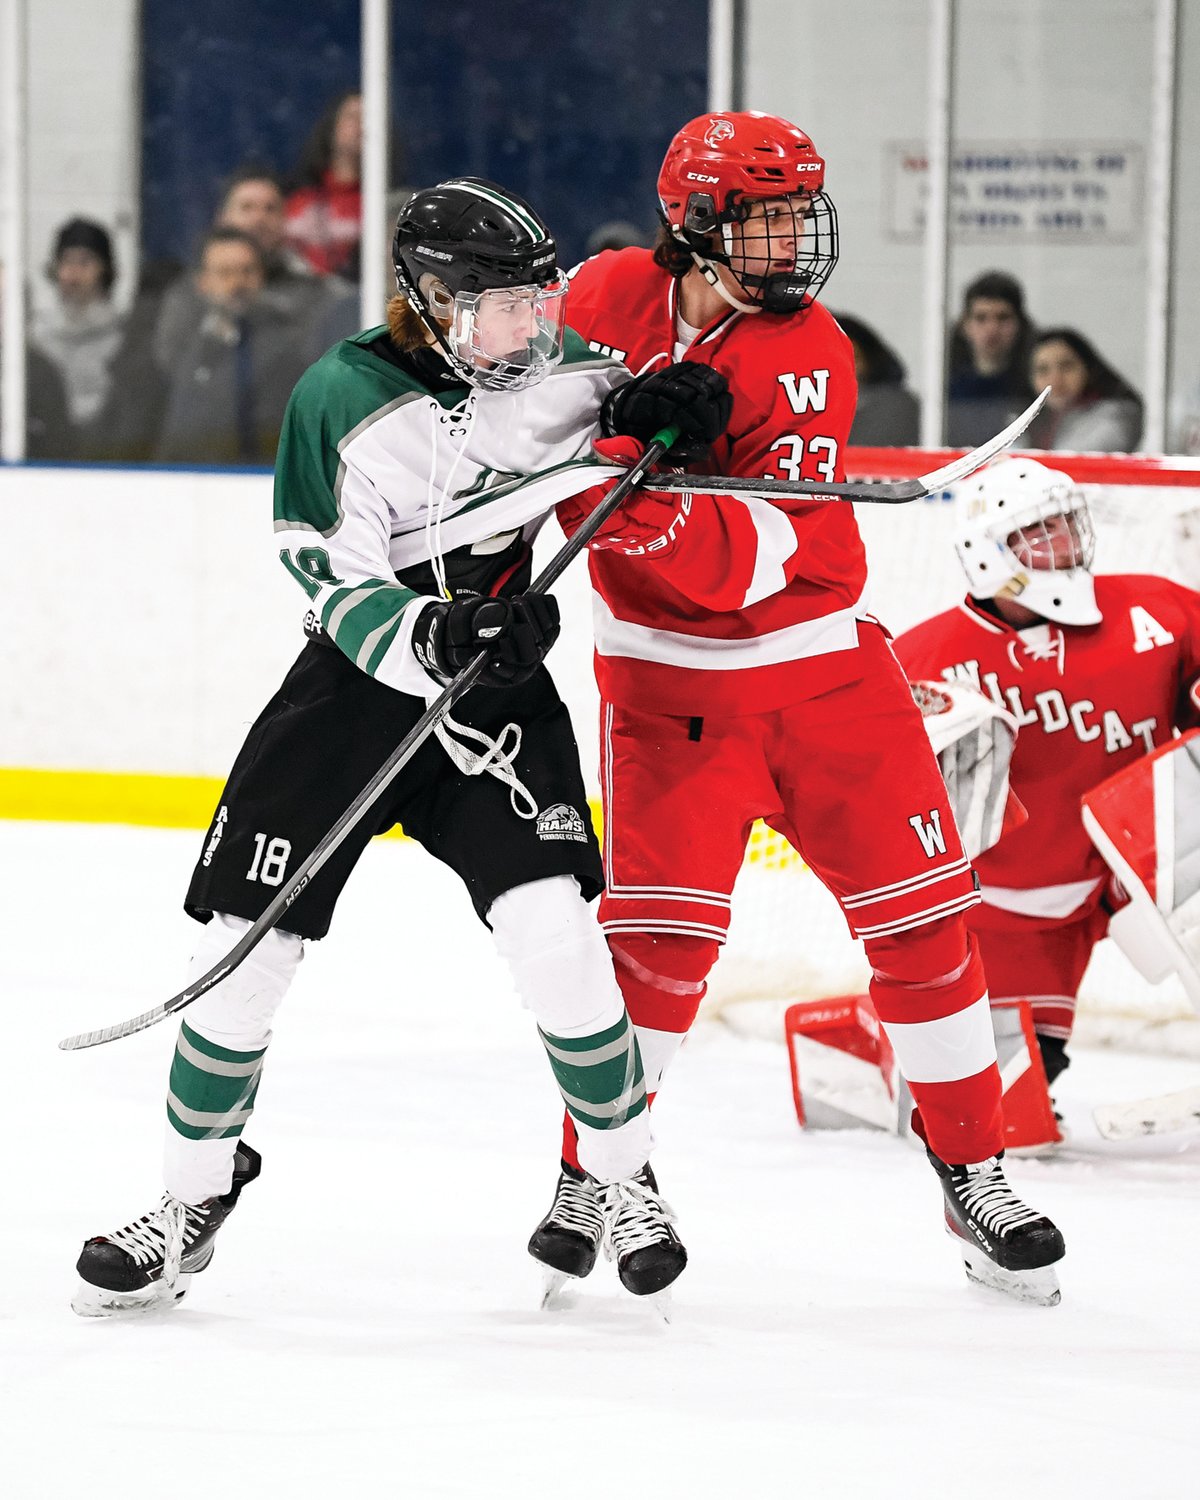 Pennridge’s Andrew Lizak gets his jersey pulled by Owen J. Roberts’ Joe Bacalao as they battle in front of the net.